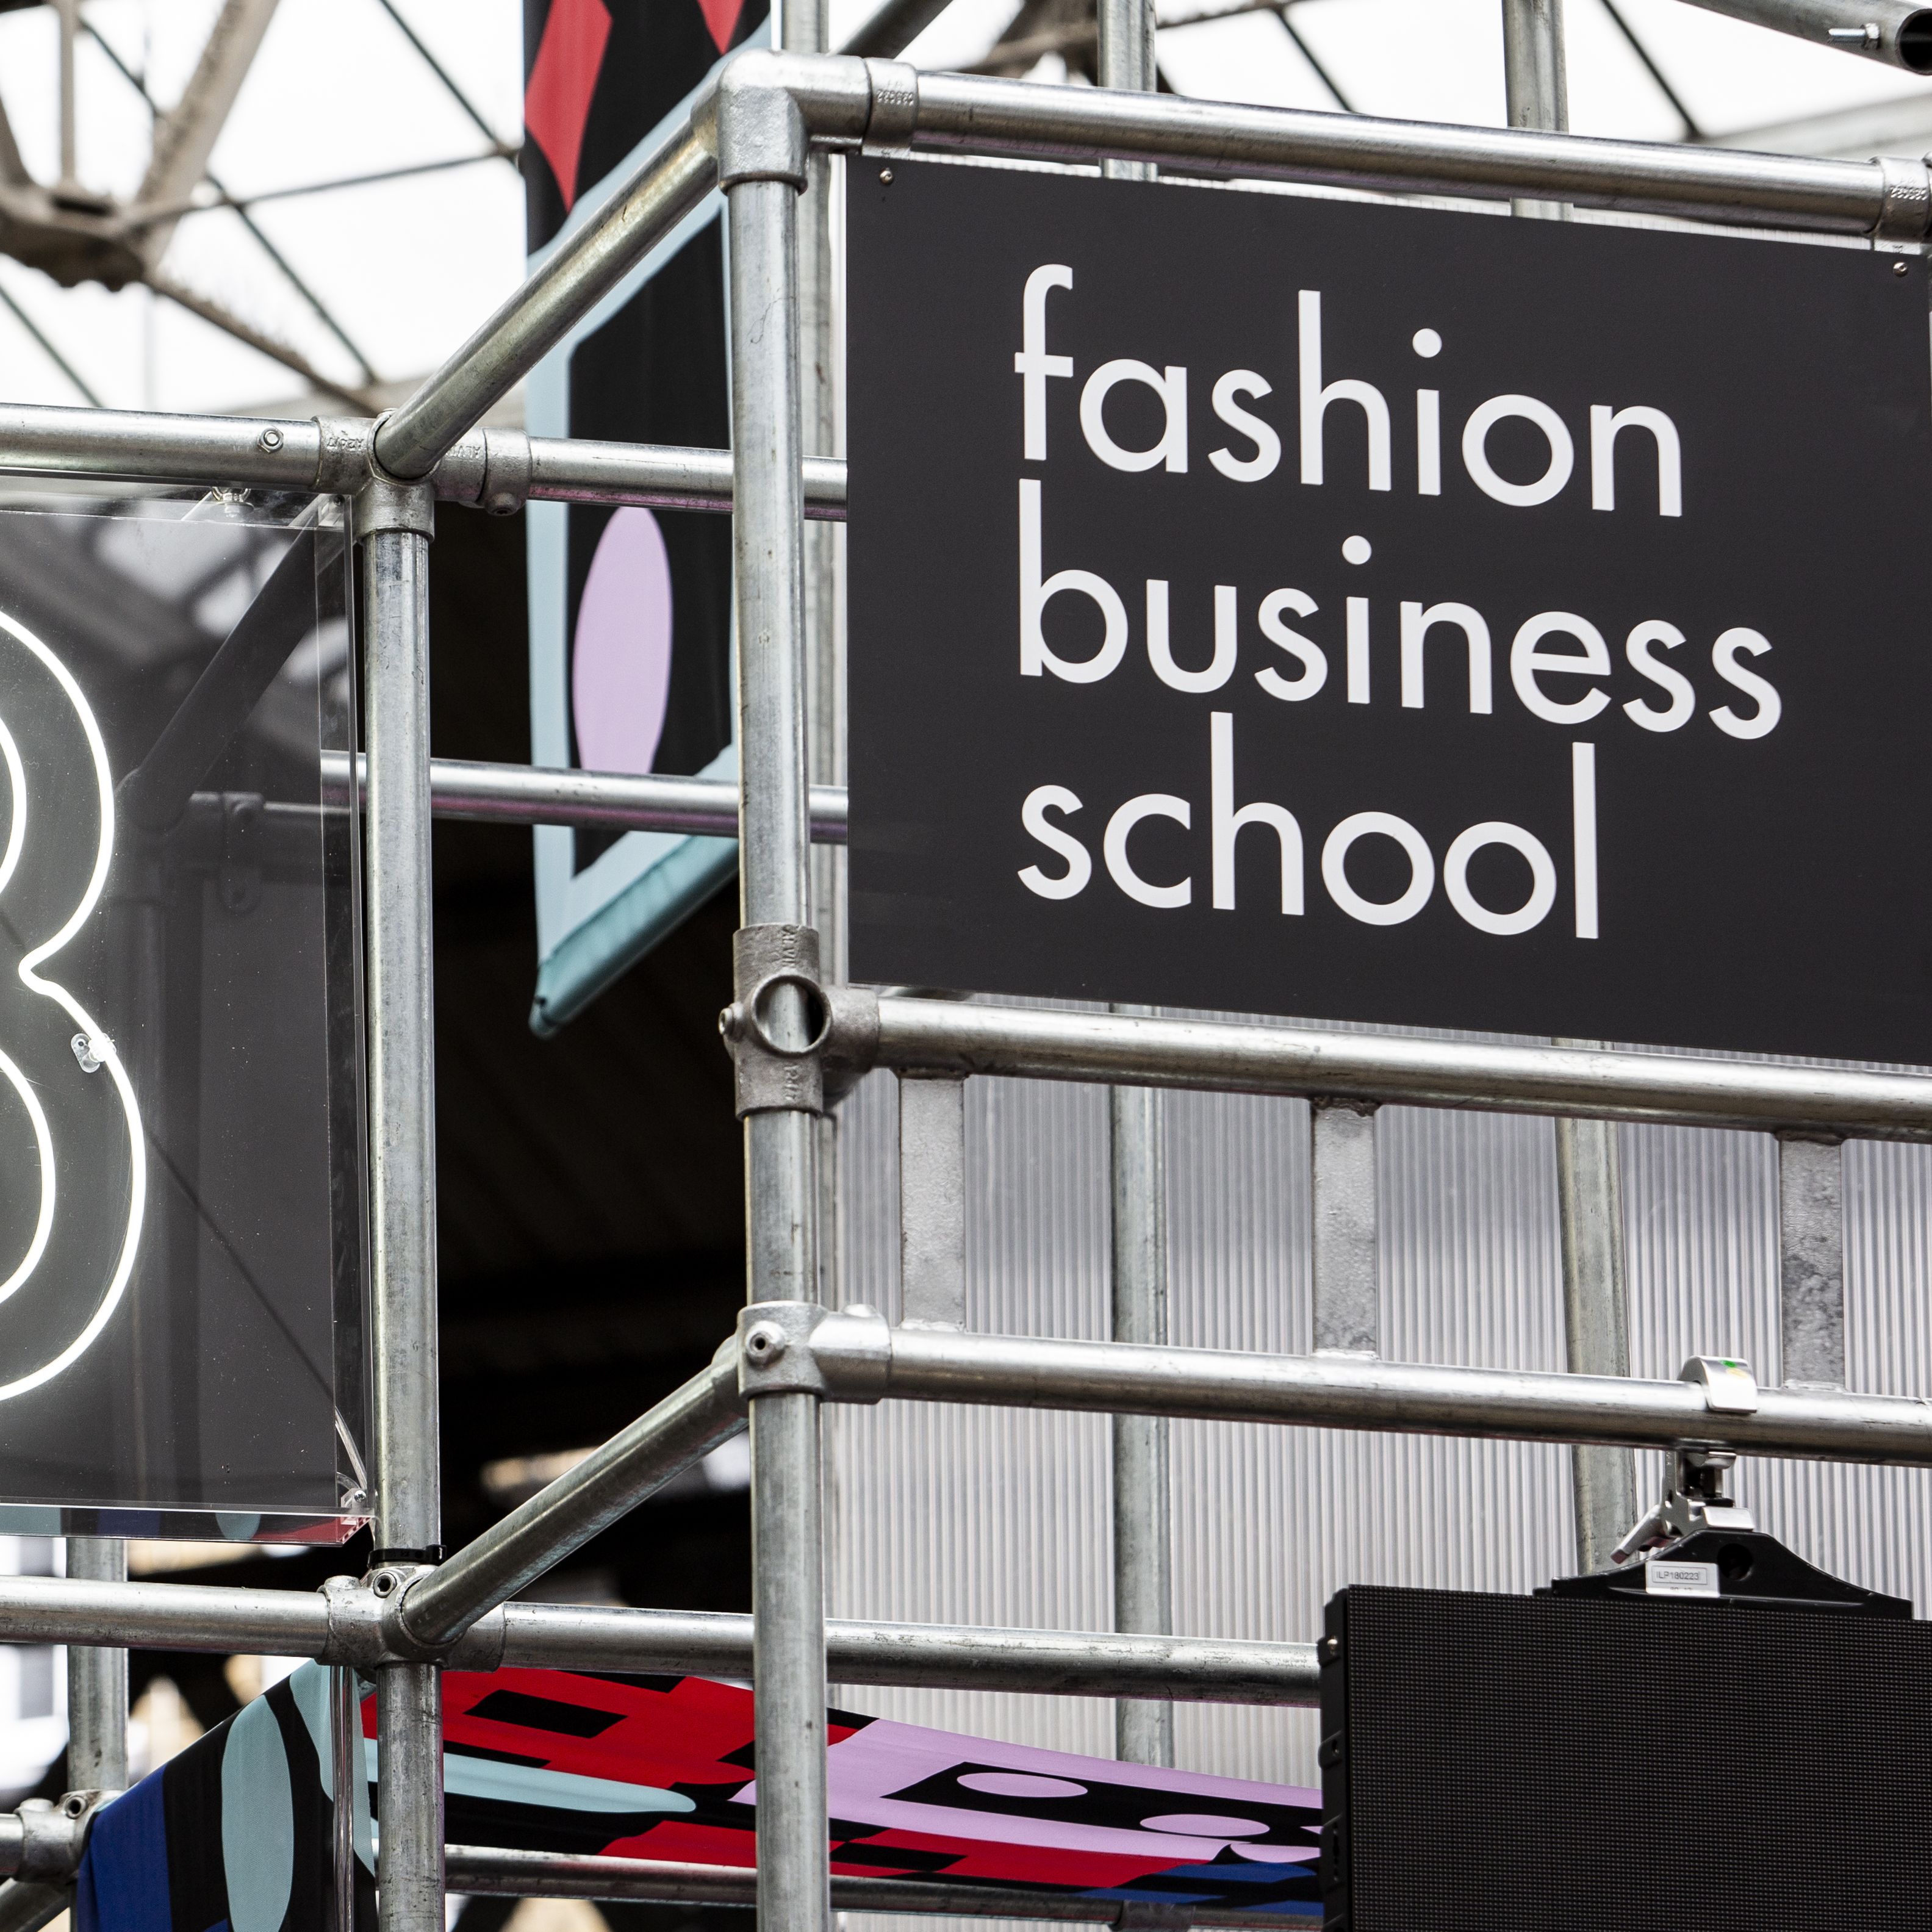 Fashion Means Business 19 by Fashion Innovation Agency at Spitalfields Market